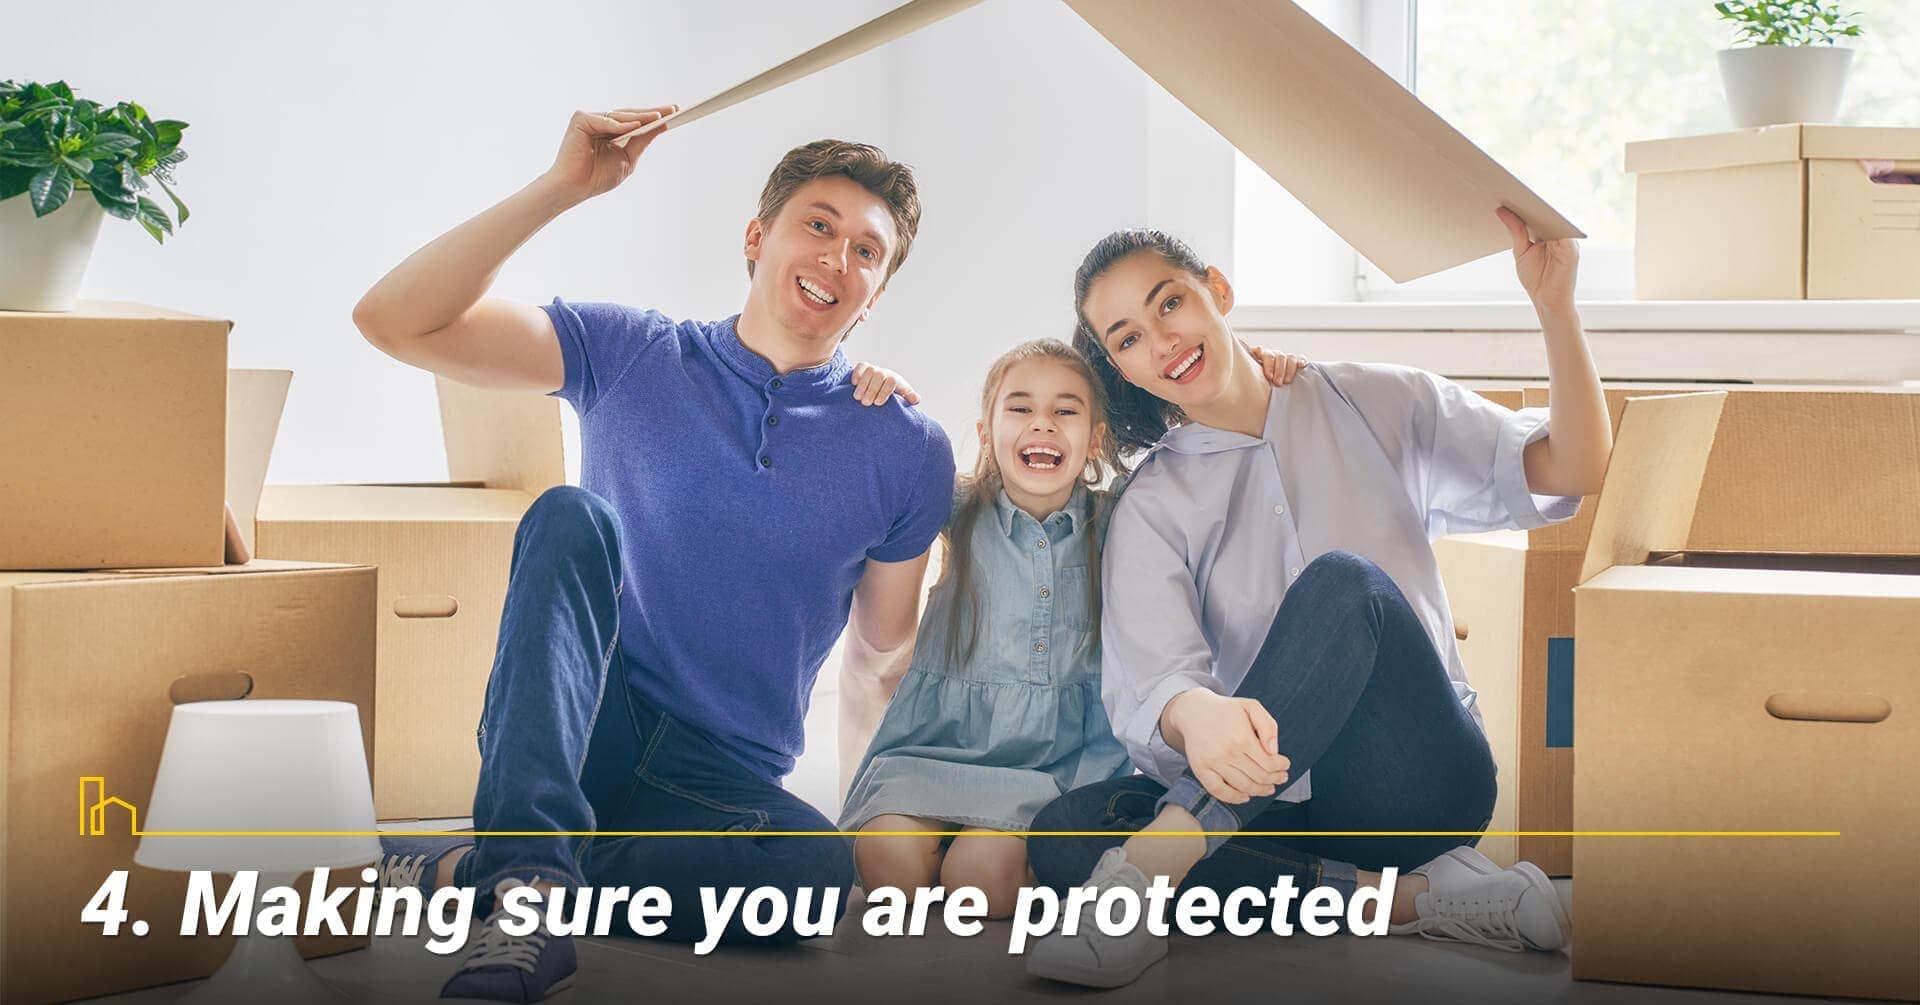 Making sure you are protected, get the right coverage for your home